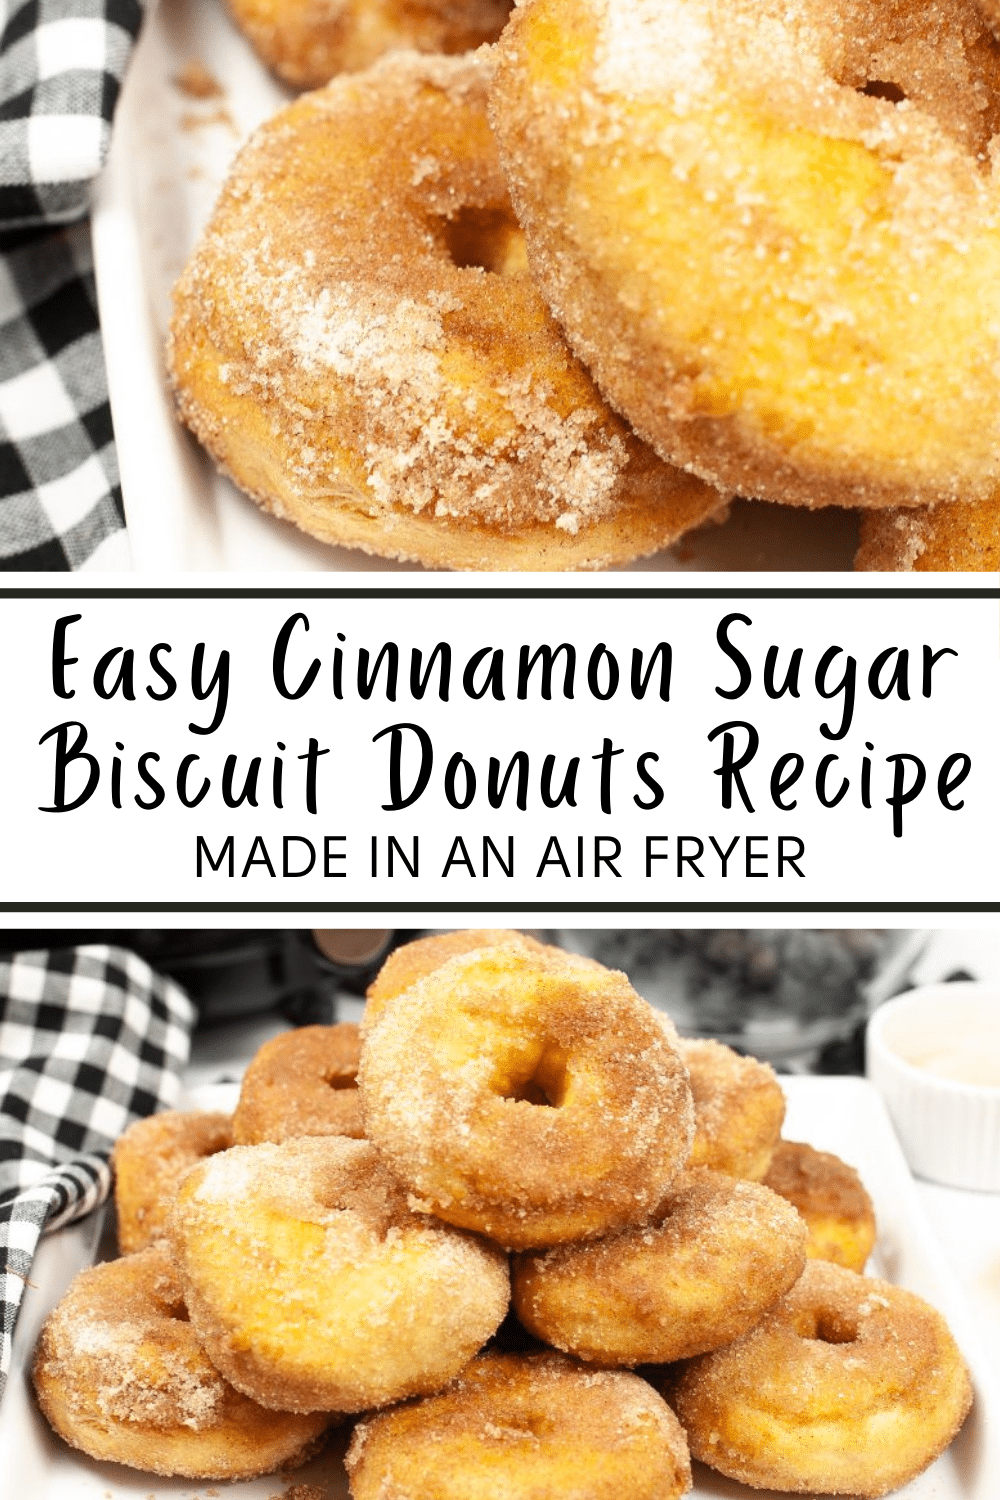 You won't believe how easy it is to make homemade donuts in your air fryer! Just 4 simple ingredients and 15 minutes are all you need. #airfryer #homemadedonuts #recipe via @wondermomwannab